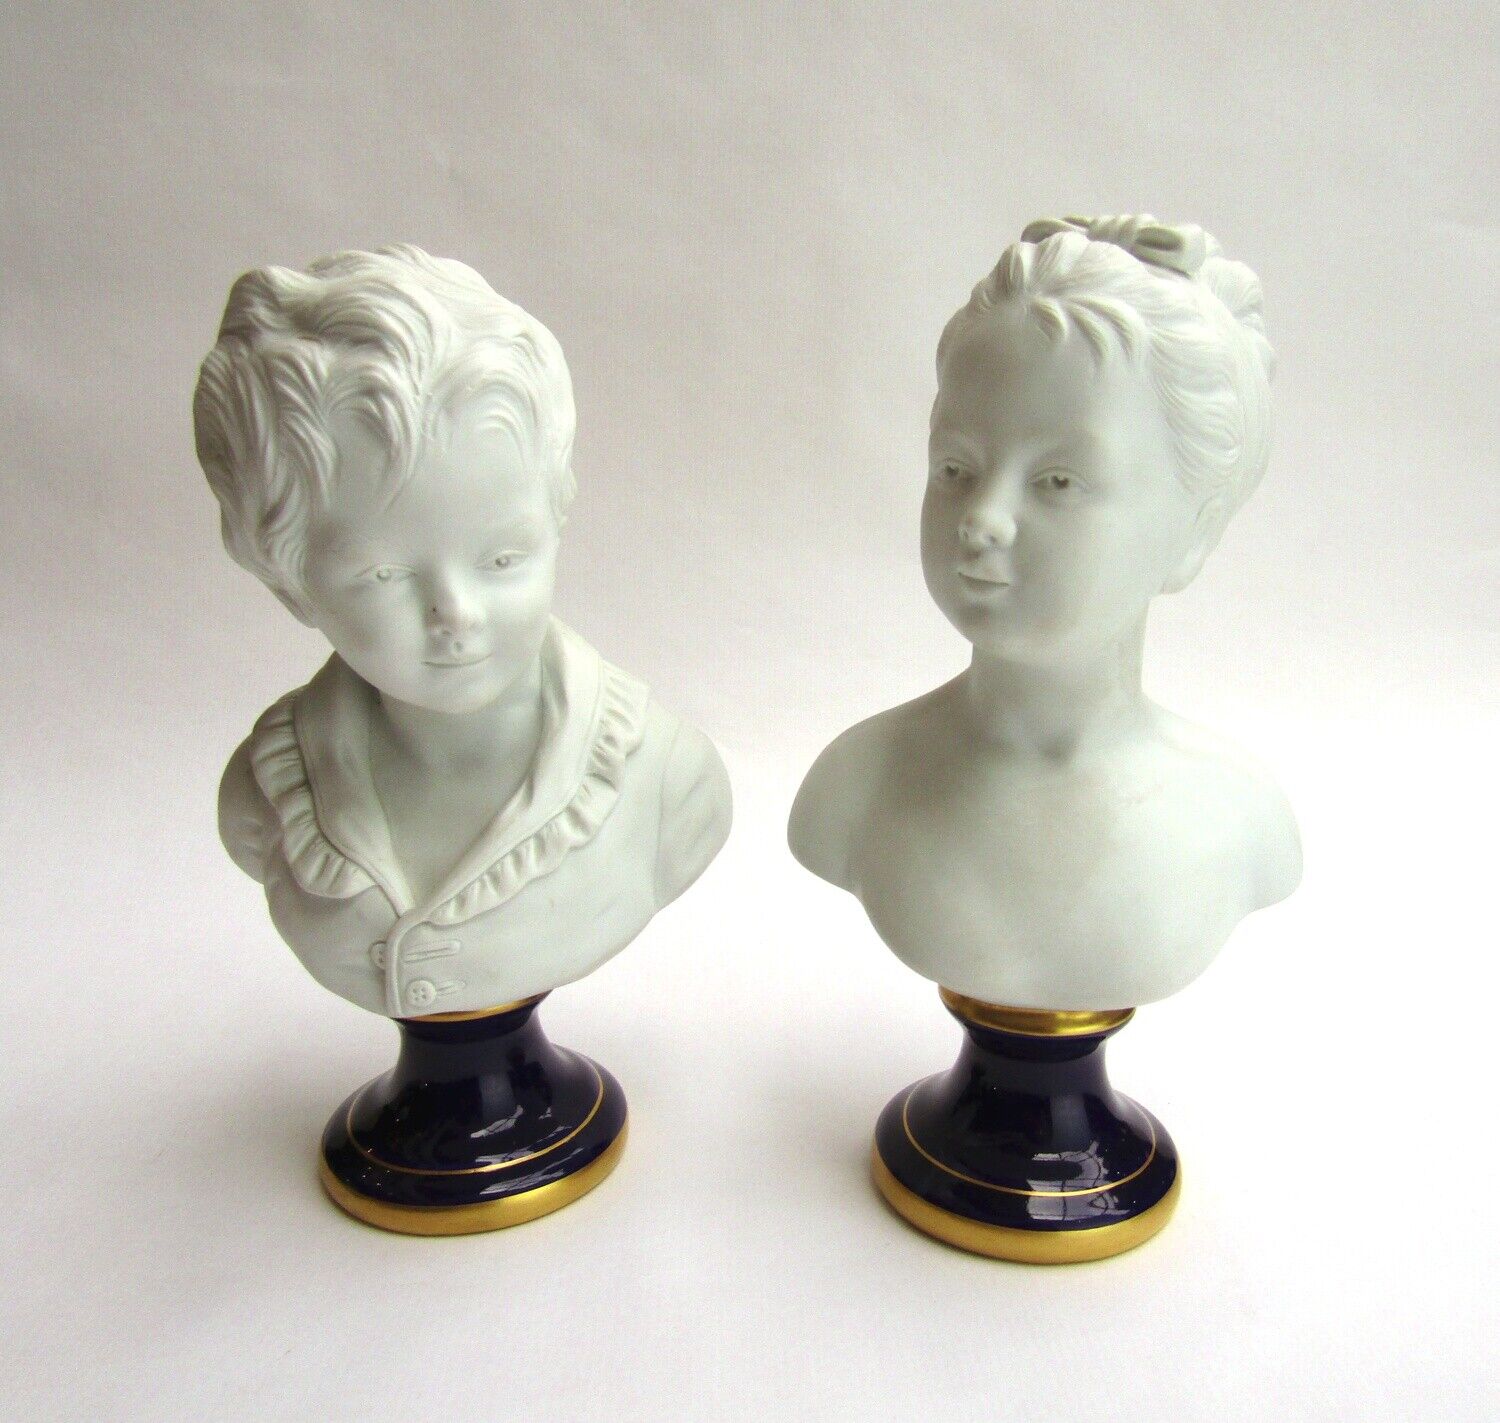 Pr. French Bisque (After Houdon) Busts of Young Boy and Girl, Early 20th C.